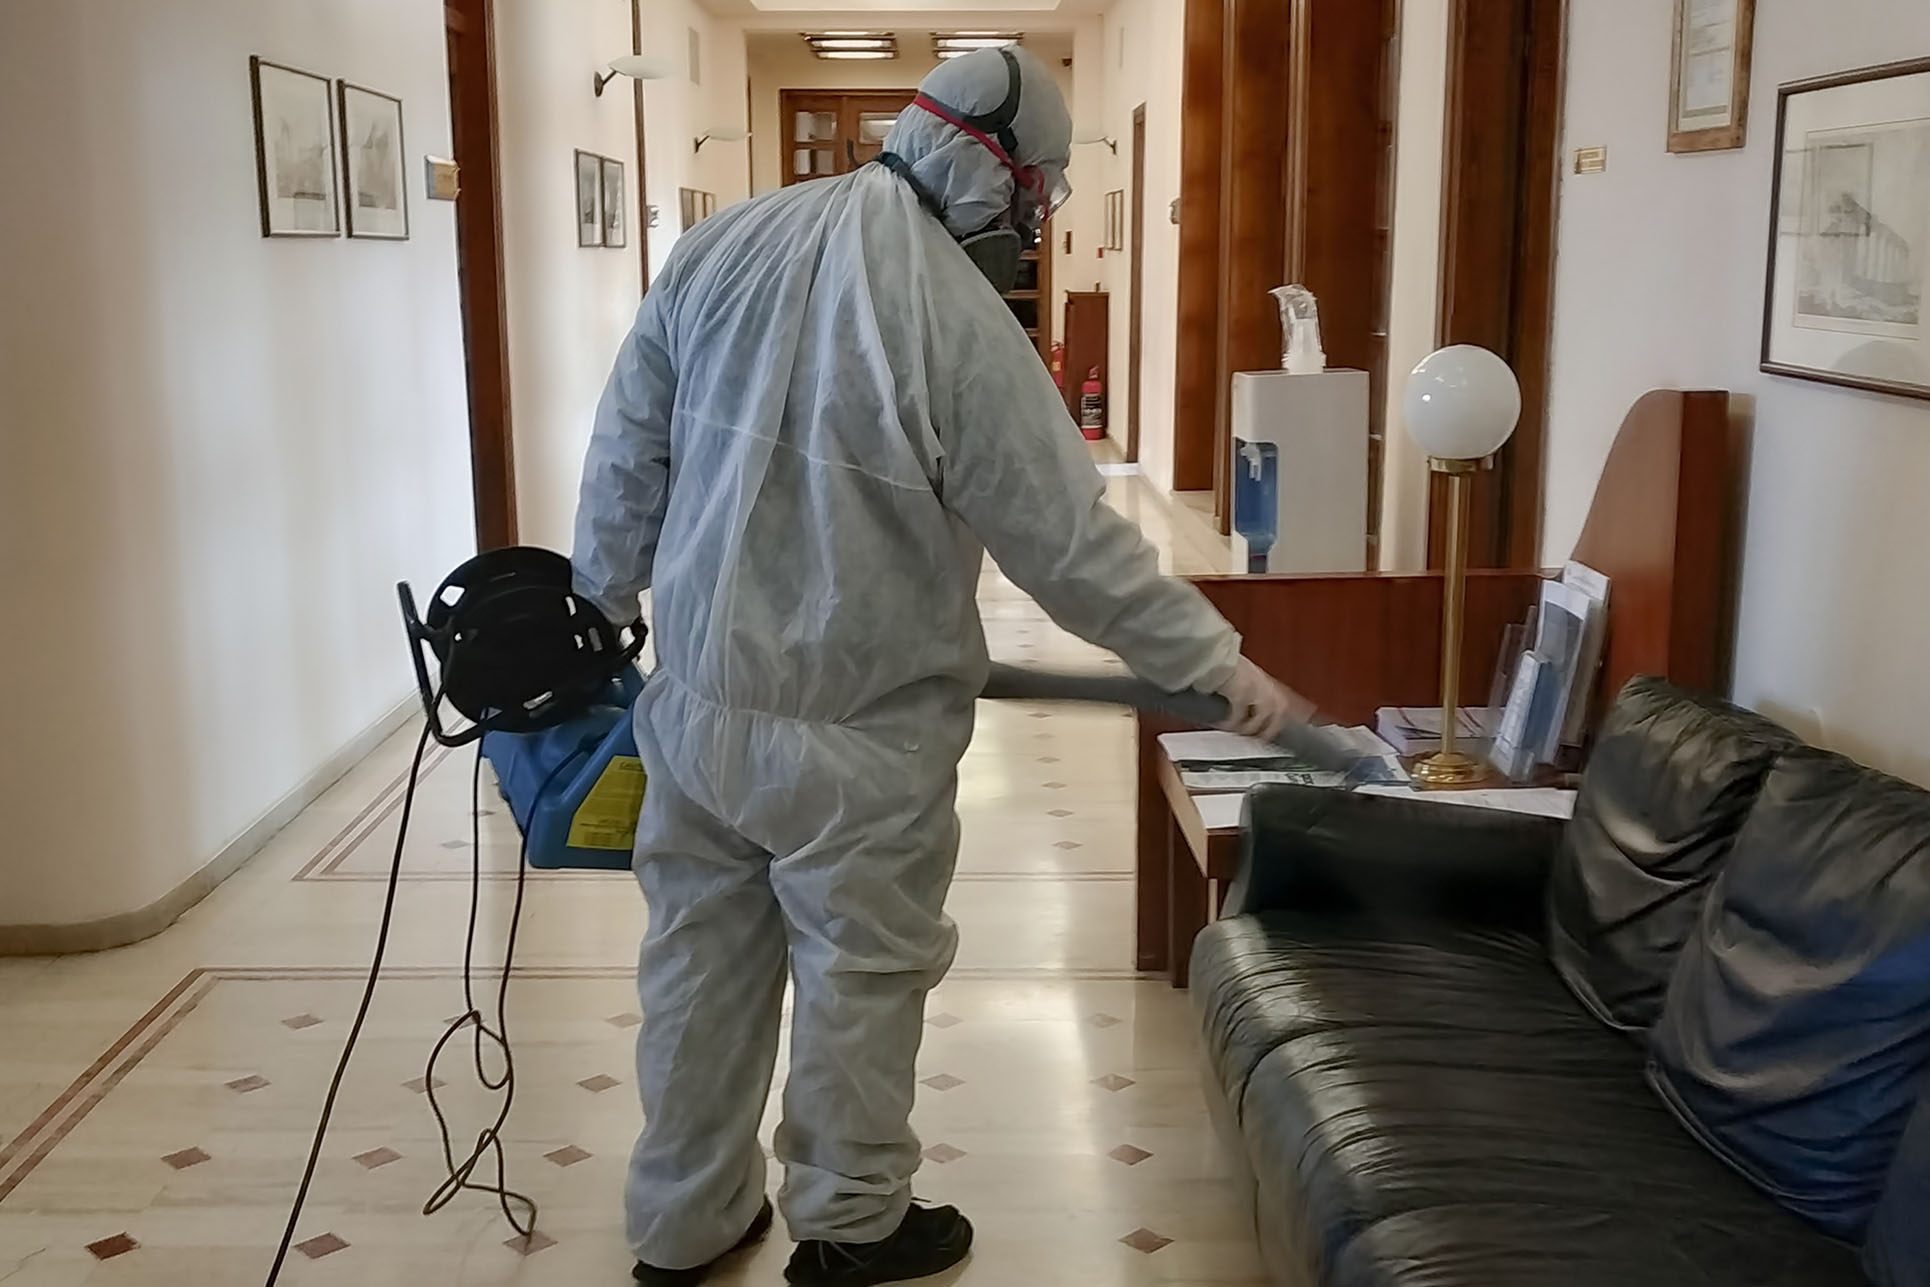 Janitorial Cleaning Service